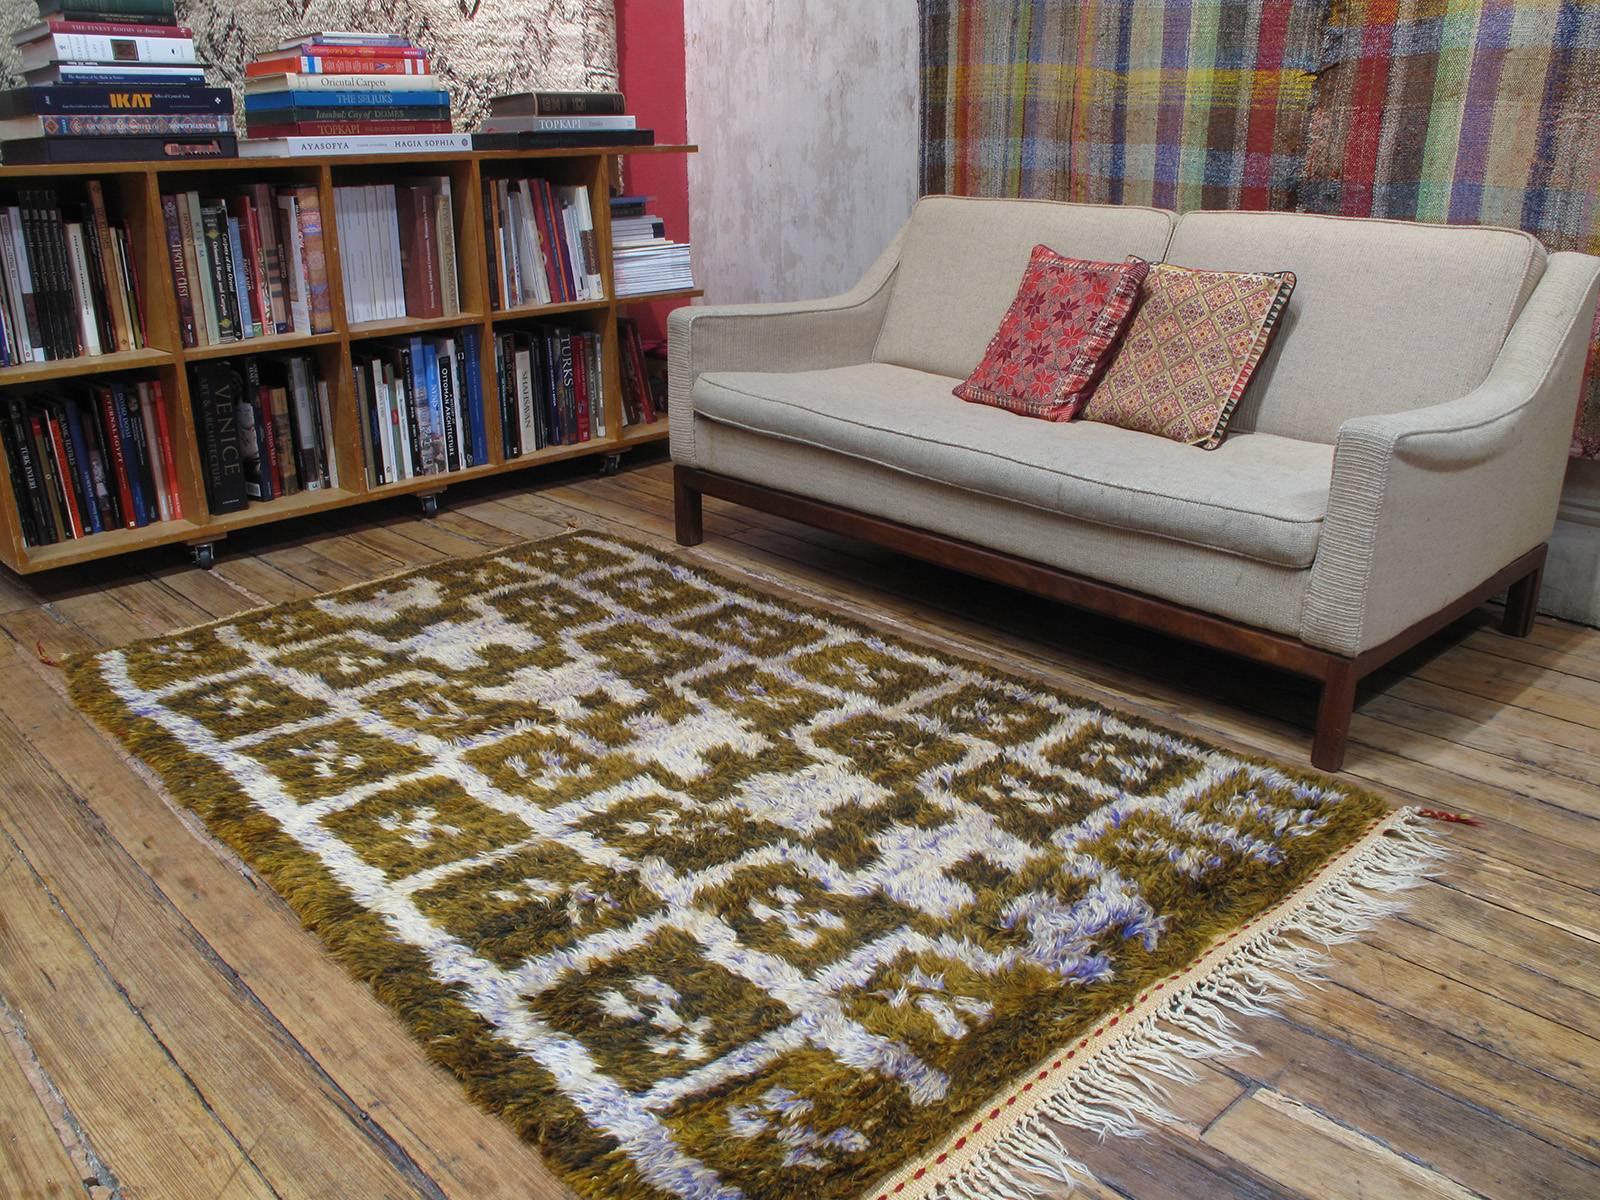 A beautiful village rug from Central Turkey, woven in the shaggy "Tulu" style, with silky, shiny Angora goat hair (mohair), featuring a whimsical interpretation of the well-known ascending arches design. The rug is very well preserved with